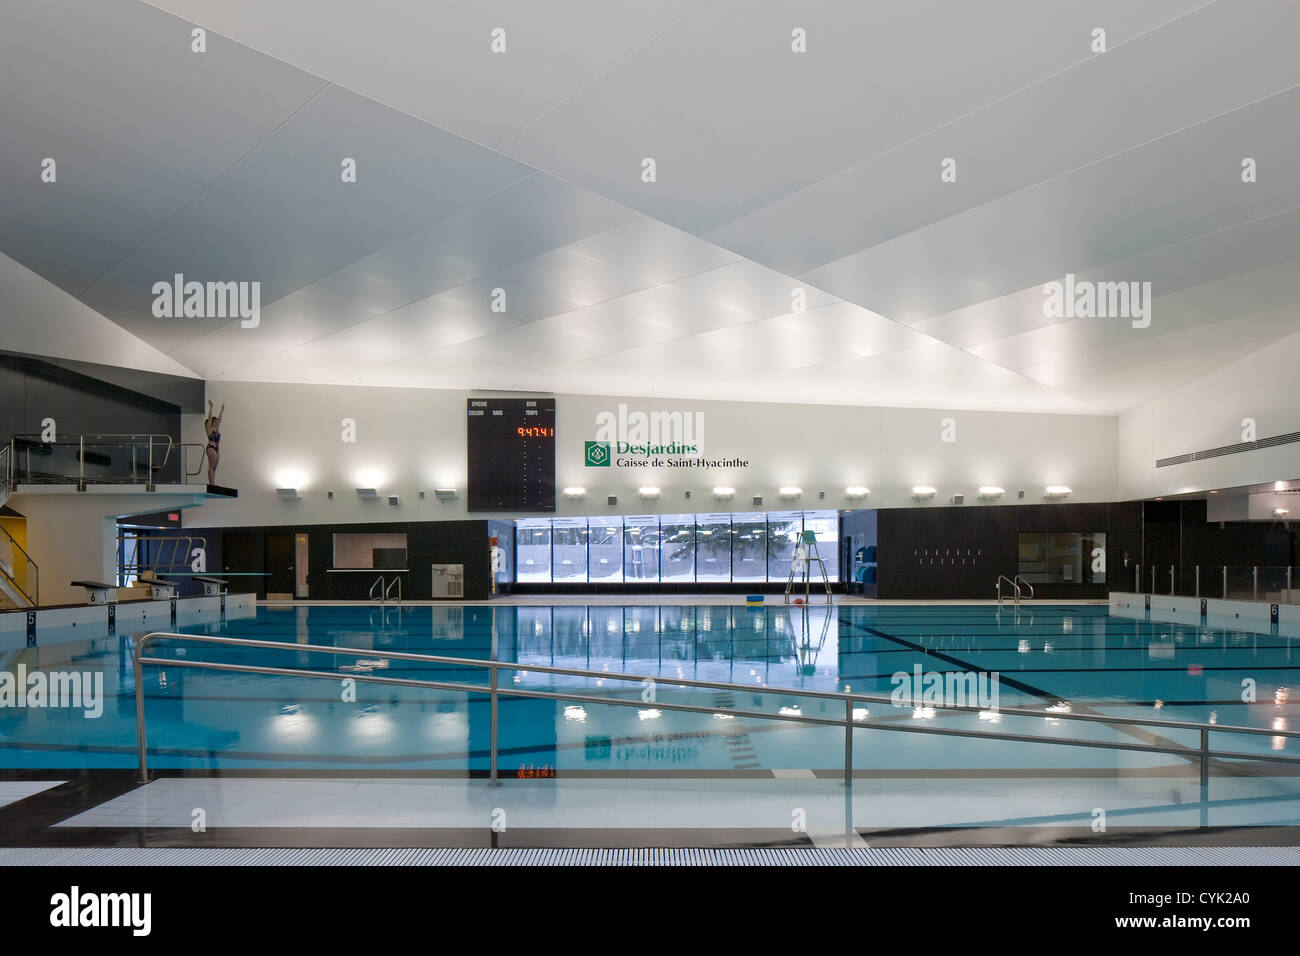 Centre Aquatique, St Hyacinthe, St Hyacinthe, Canada. Architect: acdf* Architecture, 2012. Main competition pool, diving boards. Stock Photo